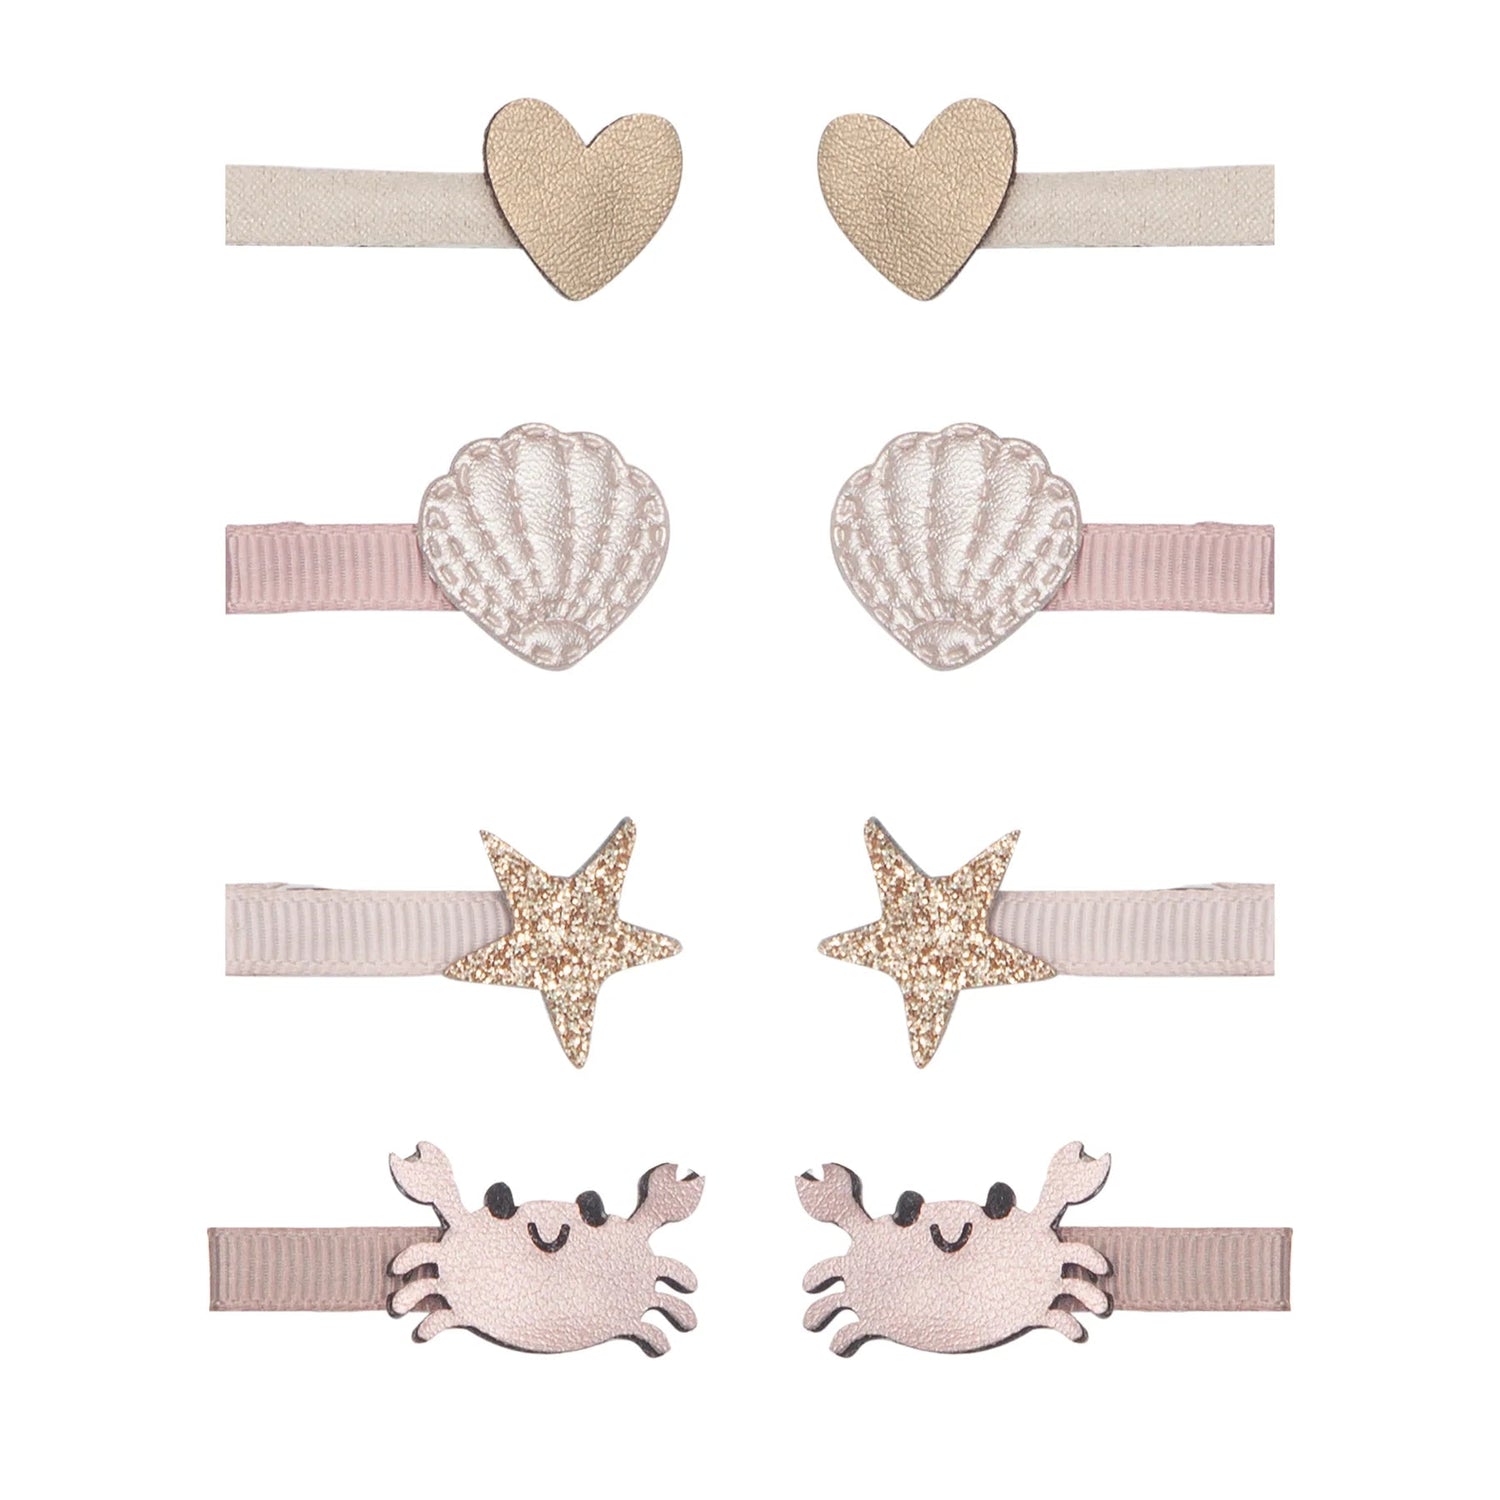 MIMI & LULA | CECIL CRAB MINI HAIR CLIPS - BY THE SEASIDE *PRE-ORDER* by MIMI & LULA - The Playful Collective